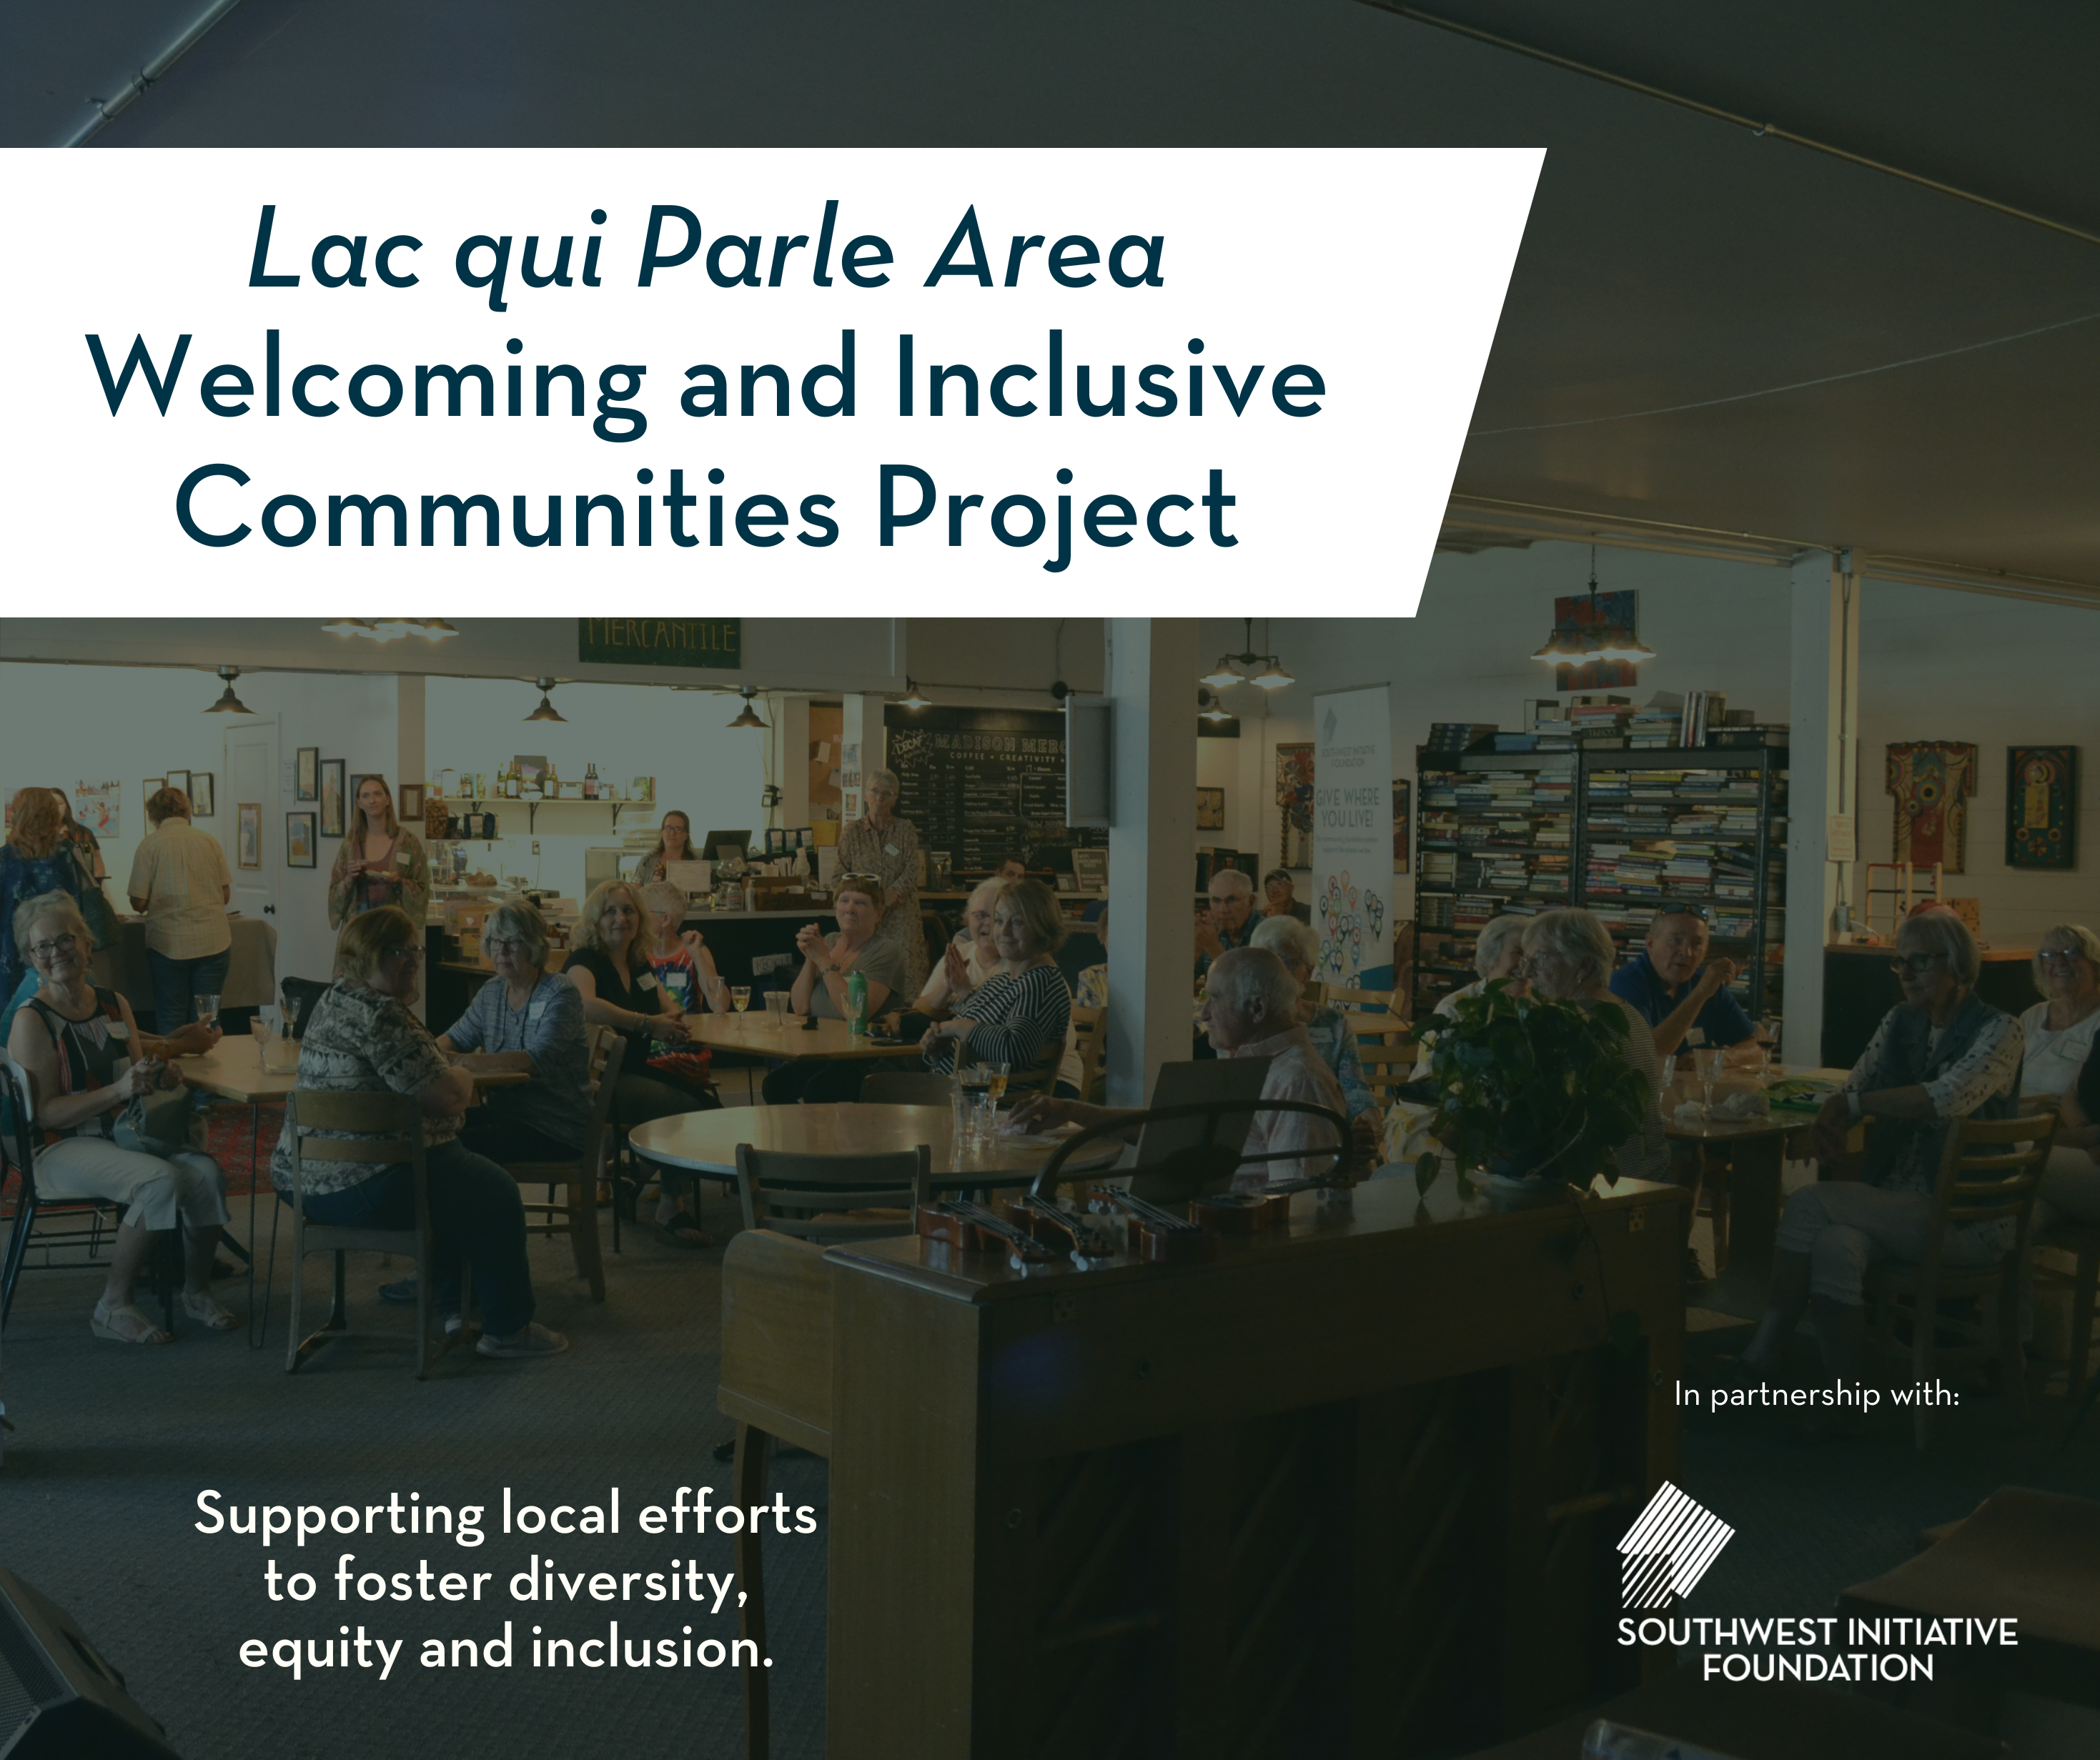 Image of a group gathering overlaid with copy, Lac qui Parle Area Welcoming and Inclusive Communities Project